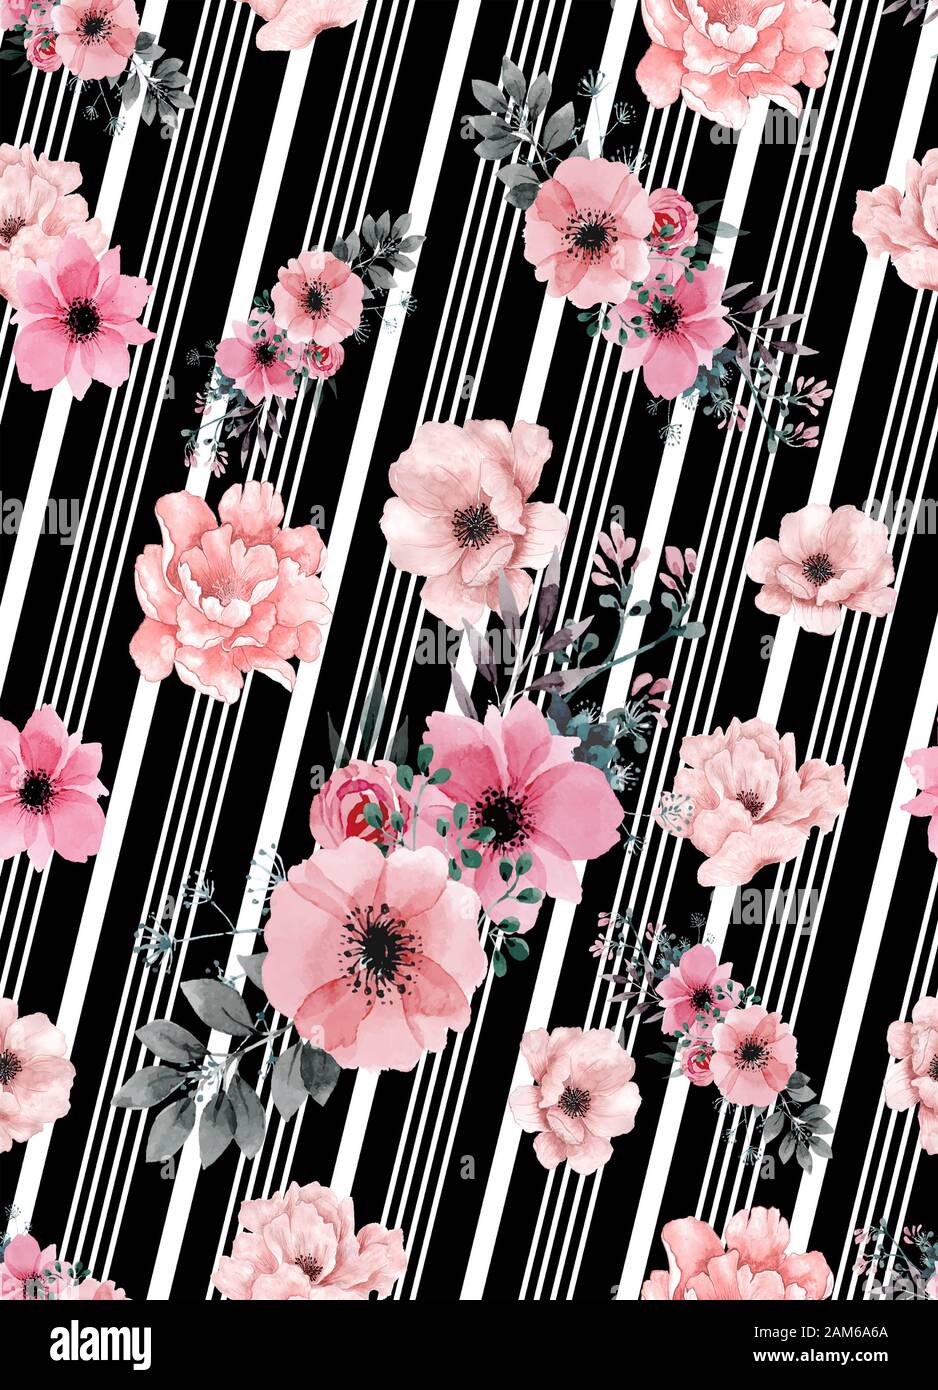 Hot Pink Black and White Stripes Paper Flowers Photography Backdrop  (Jackeline 55)